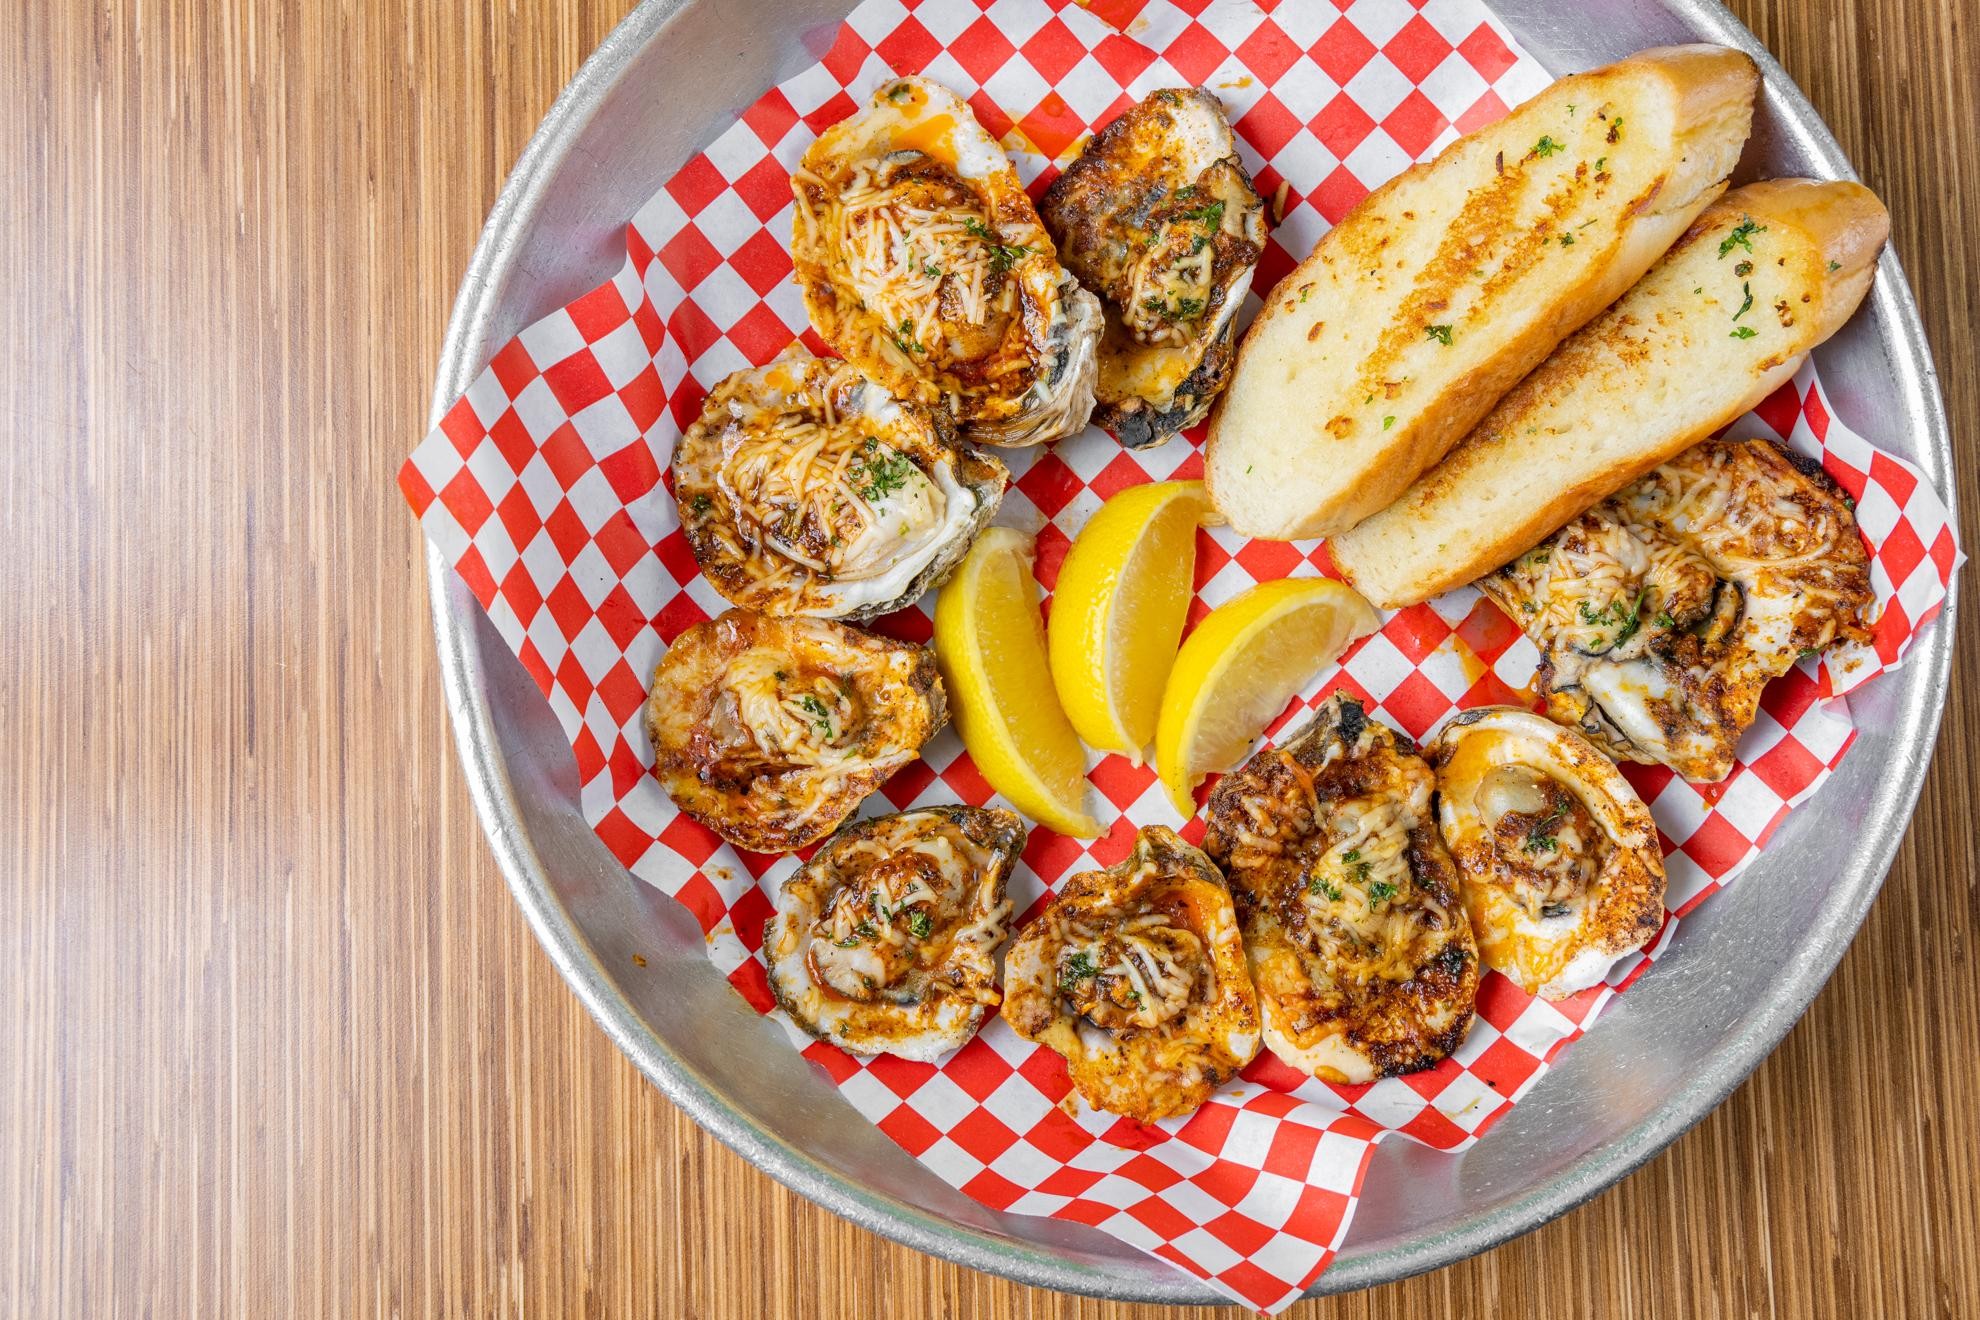 Grilled Oysters To- Go